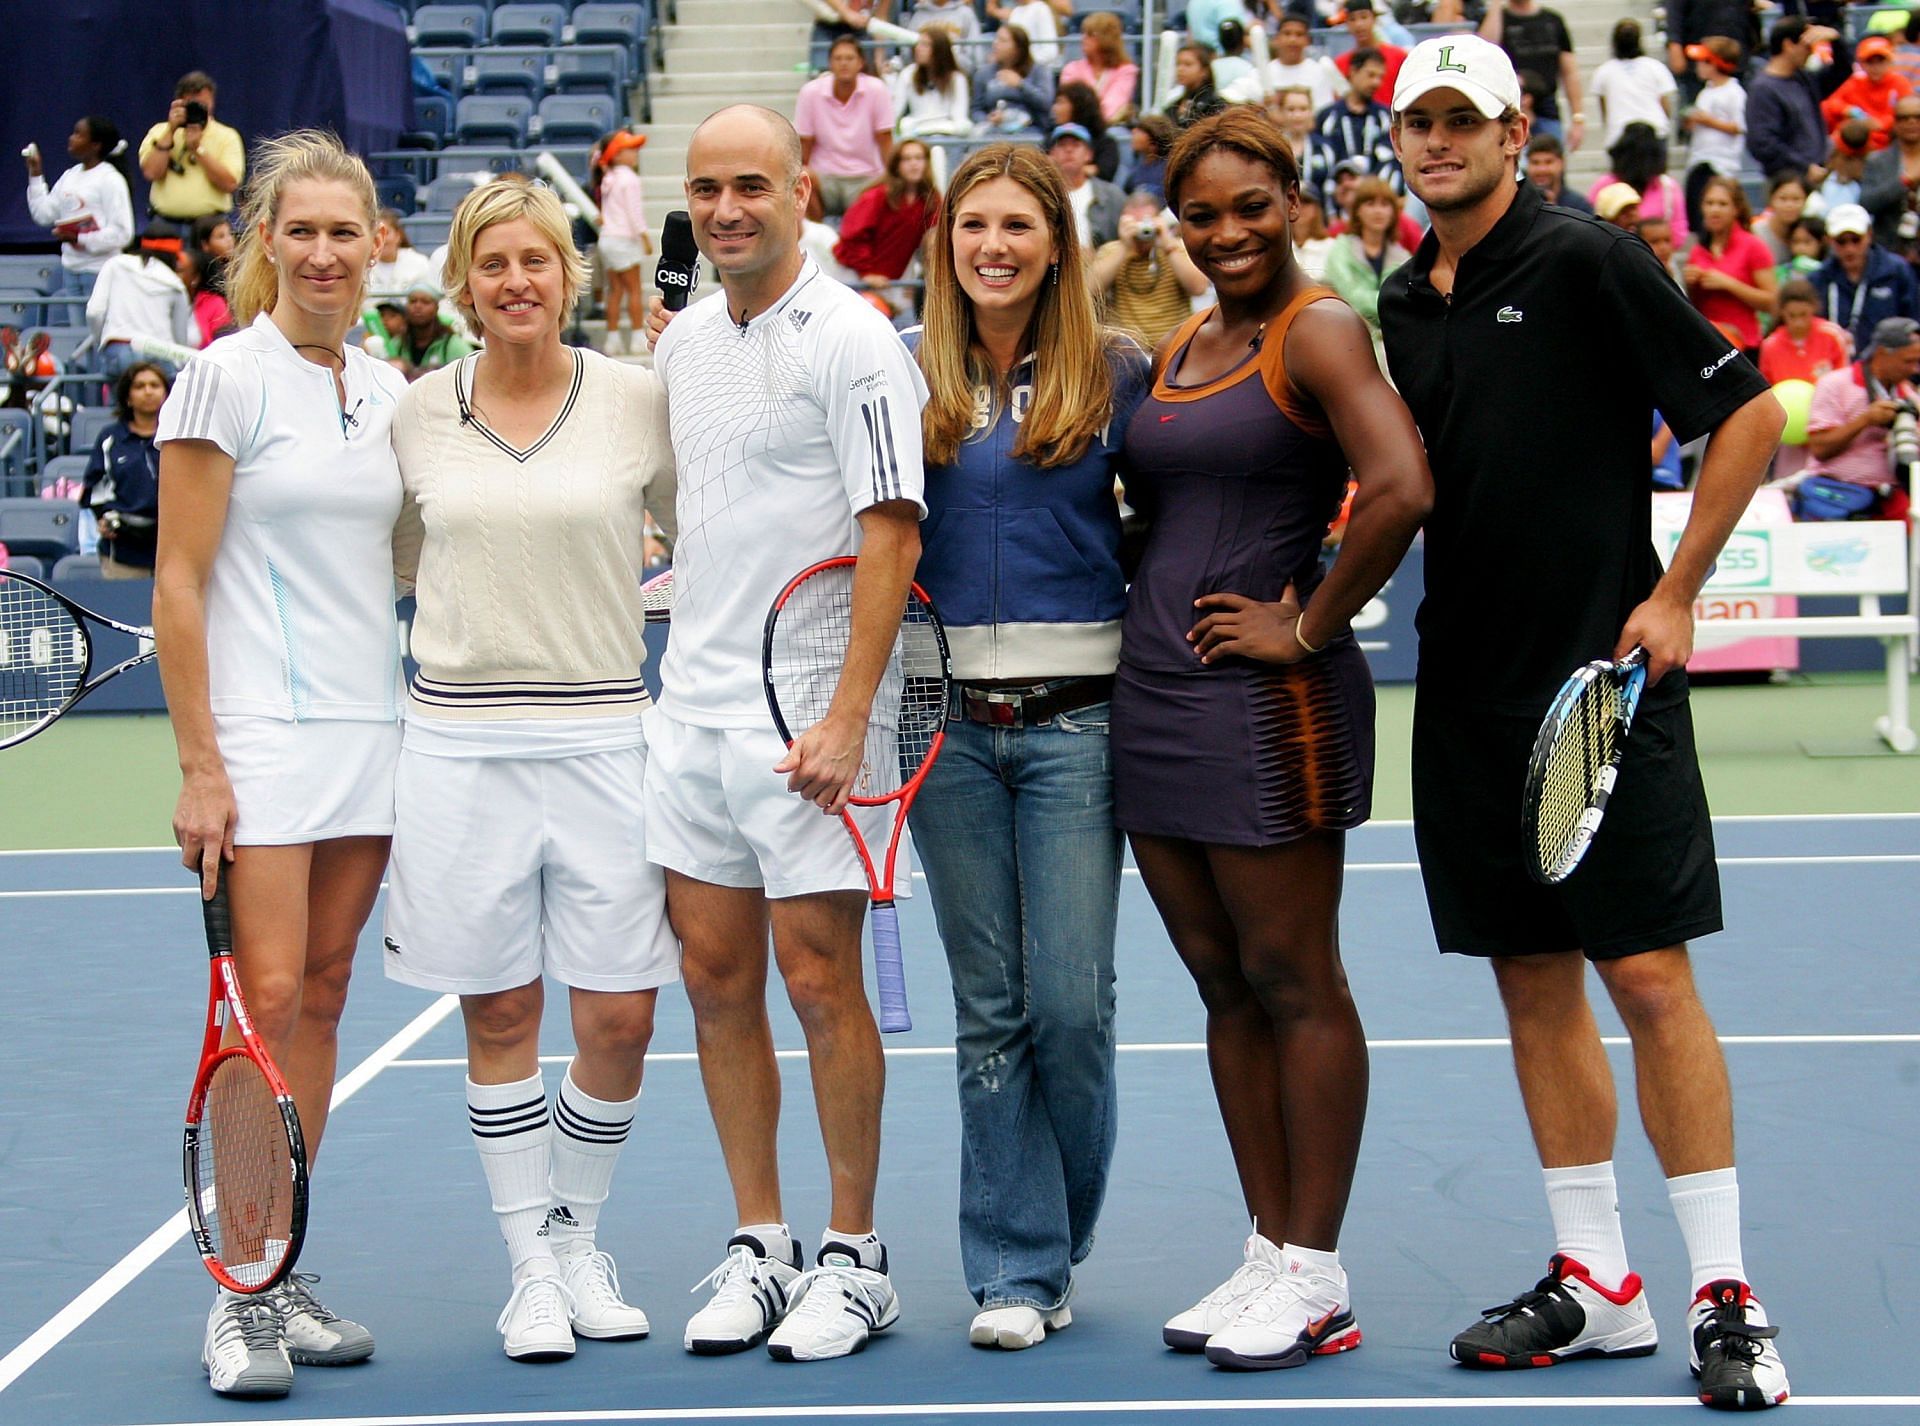 Steffi Graf with husband Andre Agassi, Serena Williams and others at US Open 2006